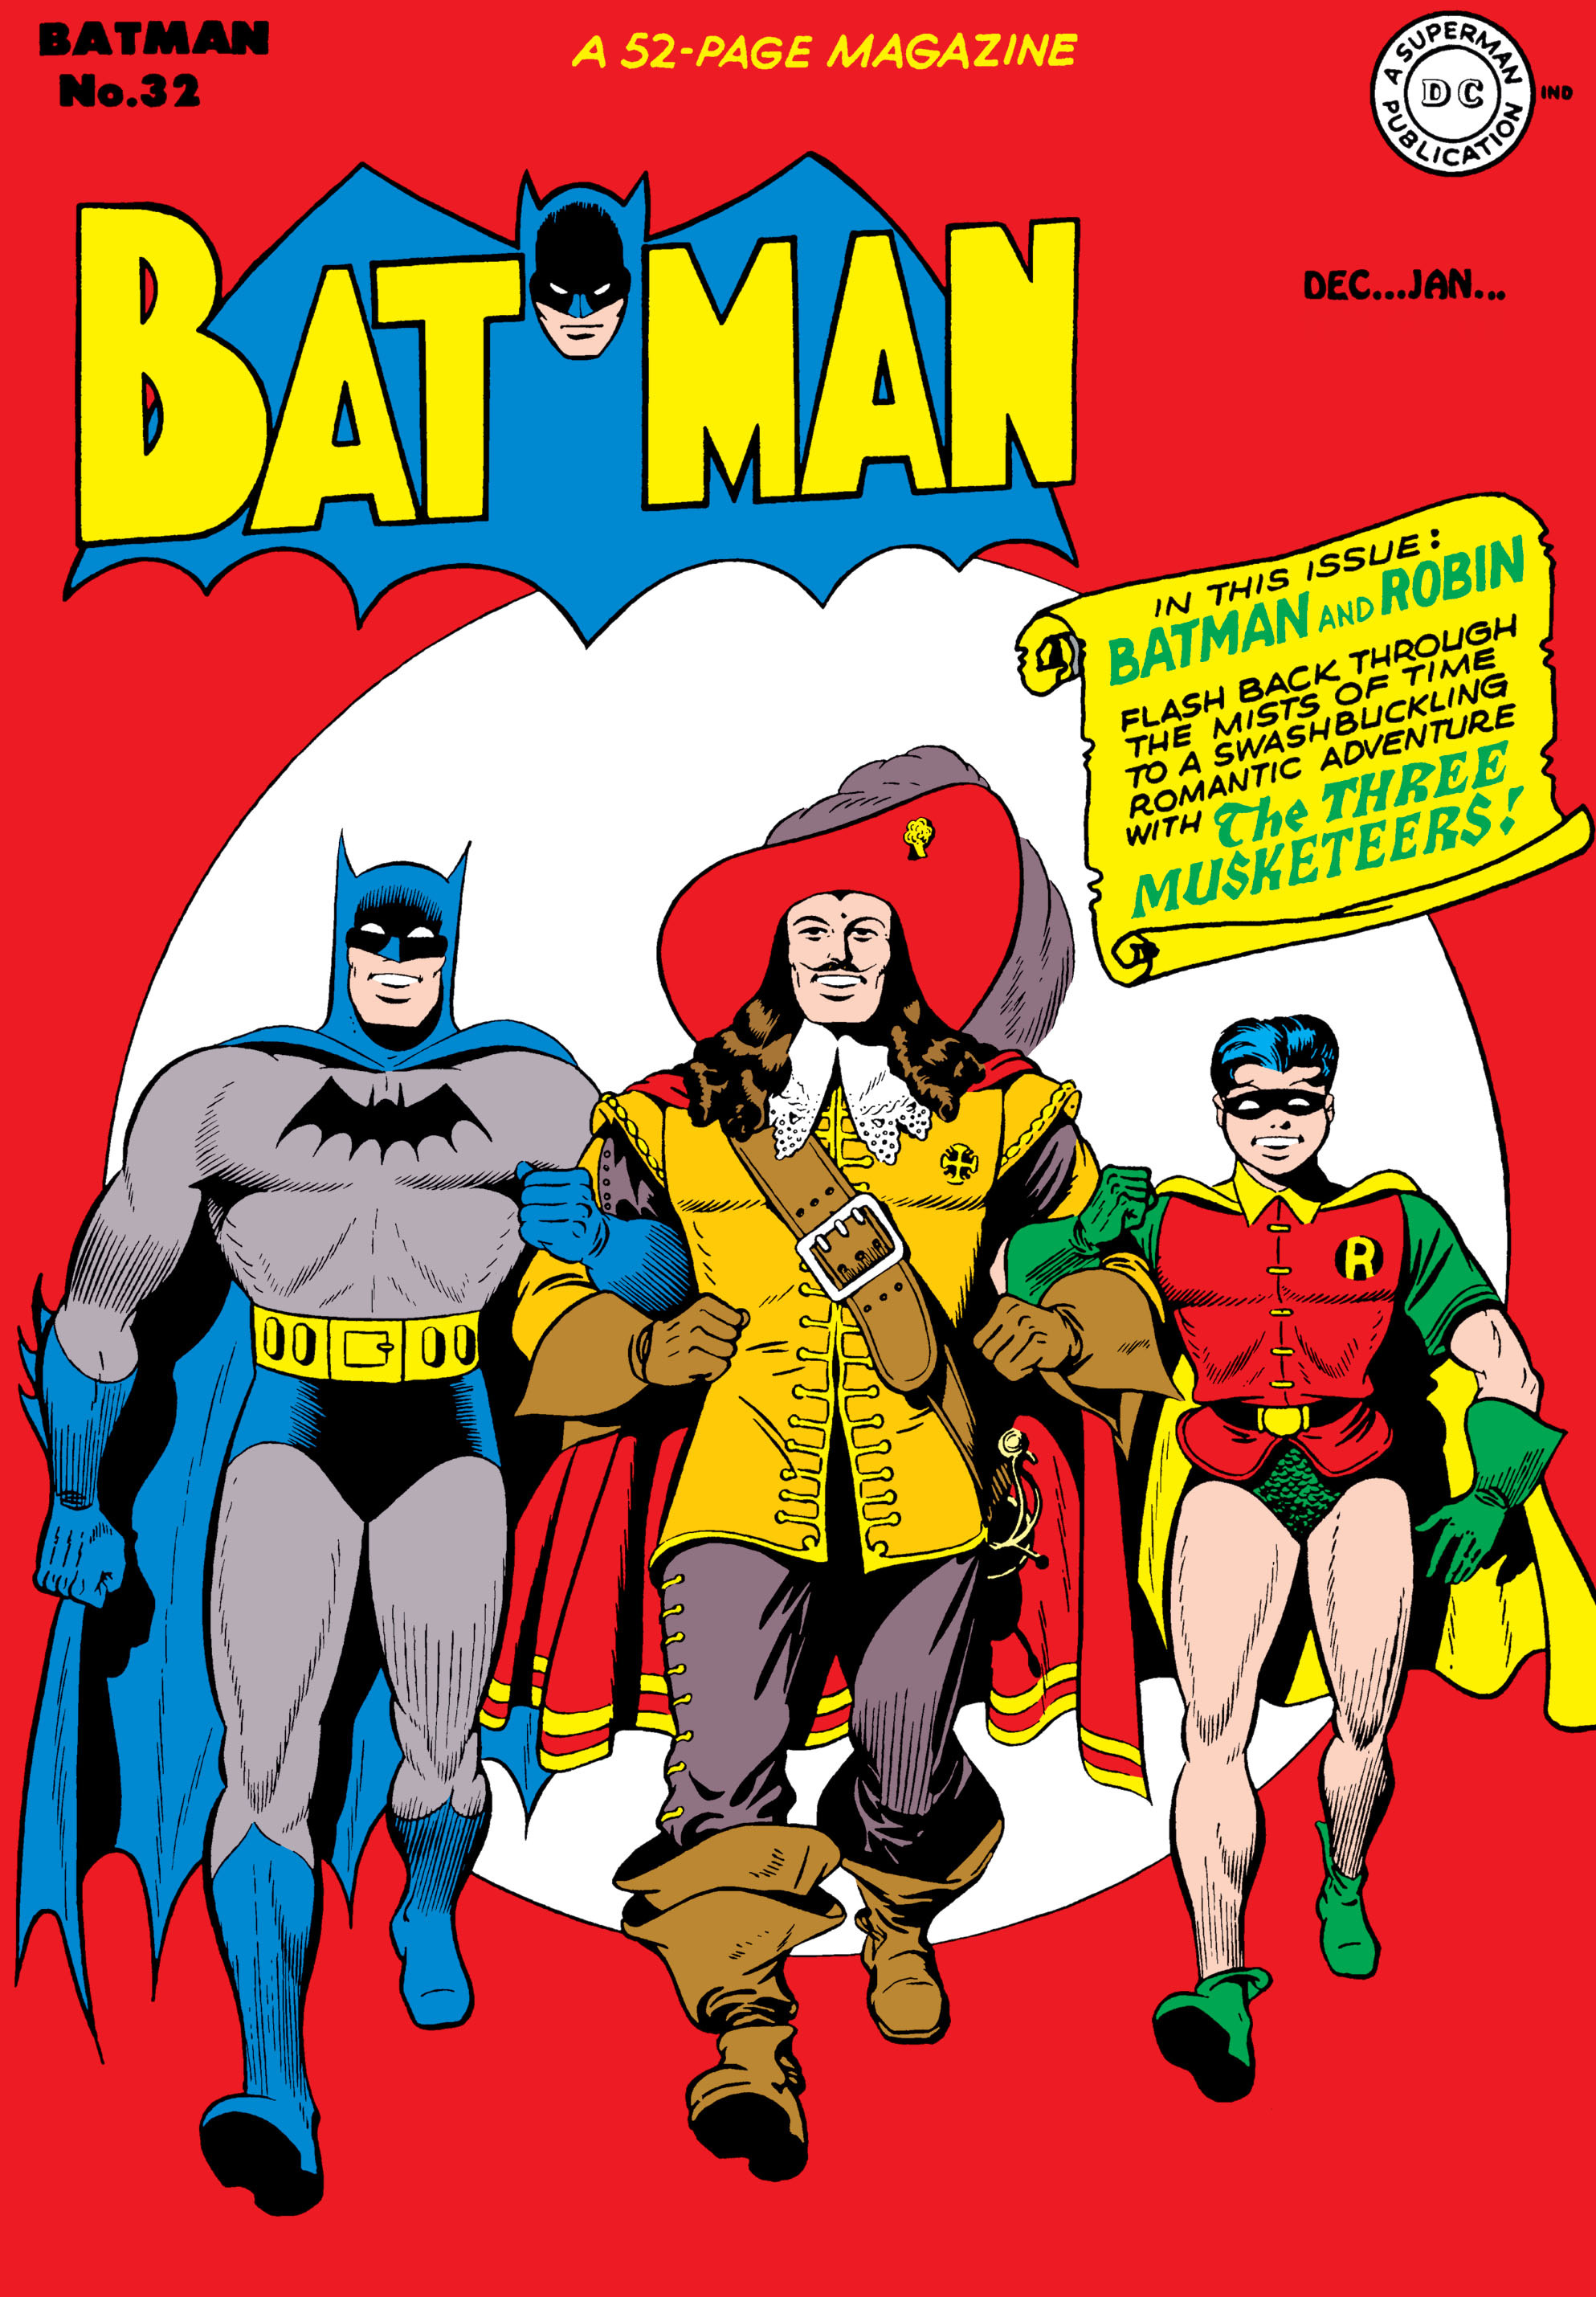 Batman 1940 Issue 32 | Read Batman 1940 Issue 32 comic online in high  quality. Read Full Comic online for free - Read comics online in high  quality .|